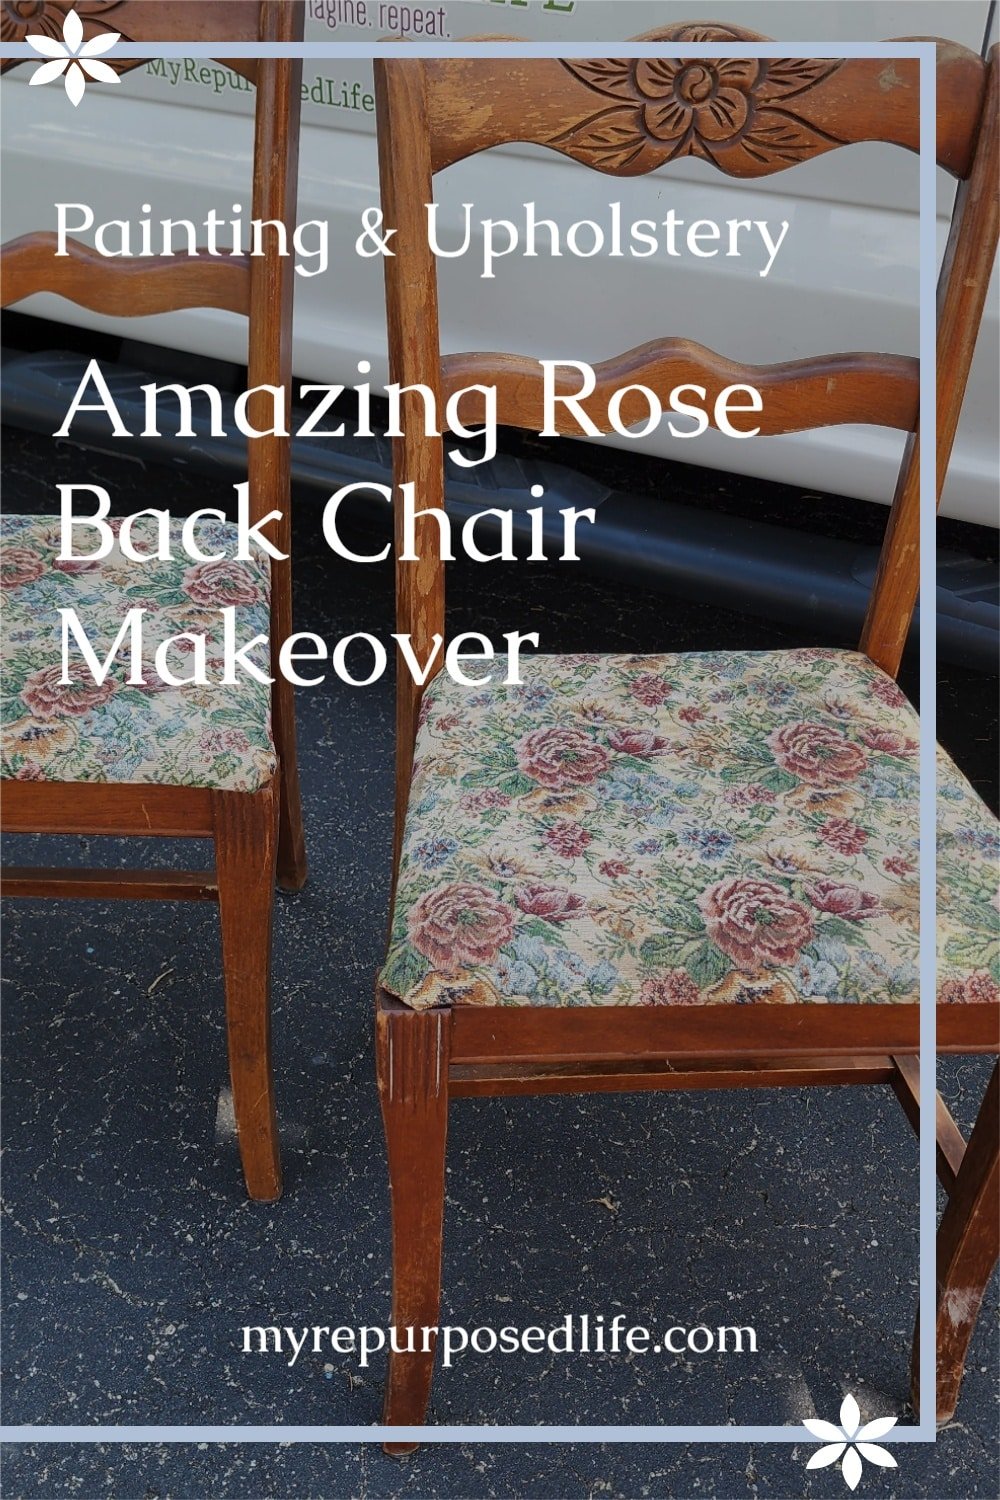 A step by step guide to show you how the do a rose back chair makeover. Yep, I'll show you tips for painting and reupholstering the seat. A tutorial that will help you makeover any dining chair you have. #myrepurposedlife #upcycle #roseback #diningchair #painting #reupholstery #diy #thriftstore via @repurposedlife